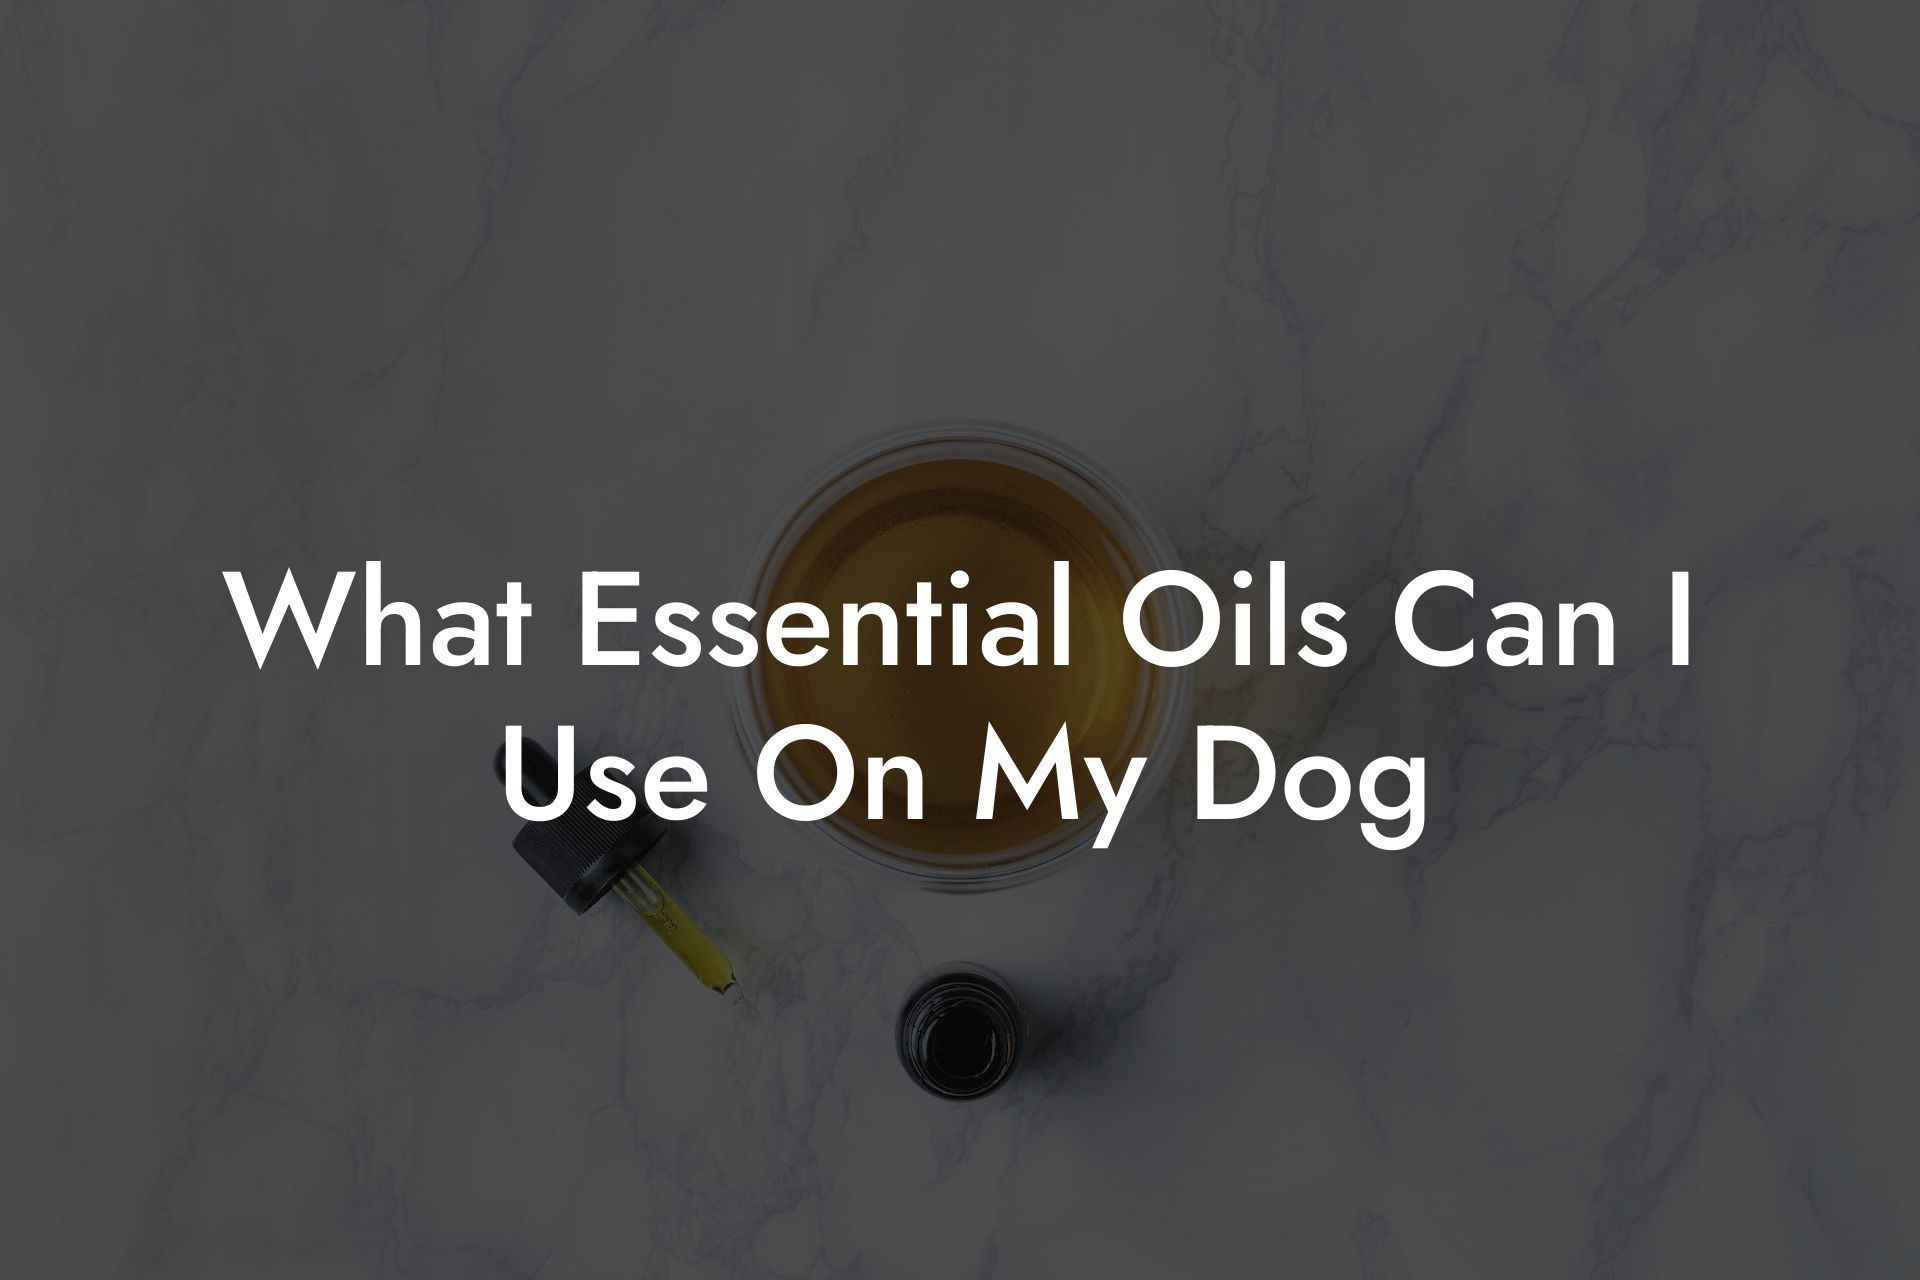 What Essential Oils Can I Use On My Dog